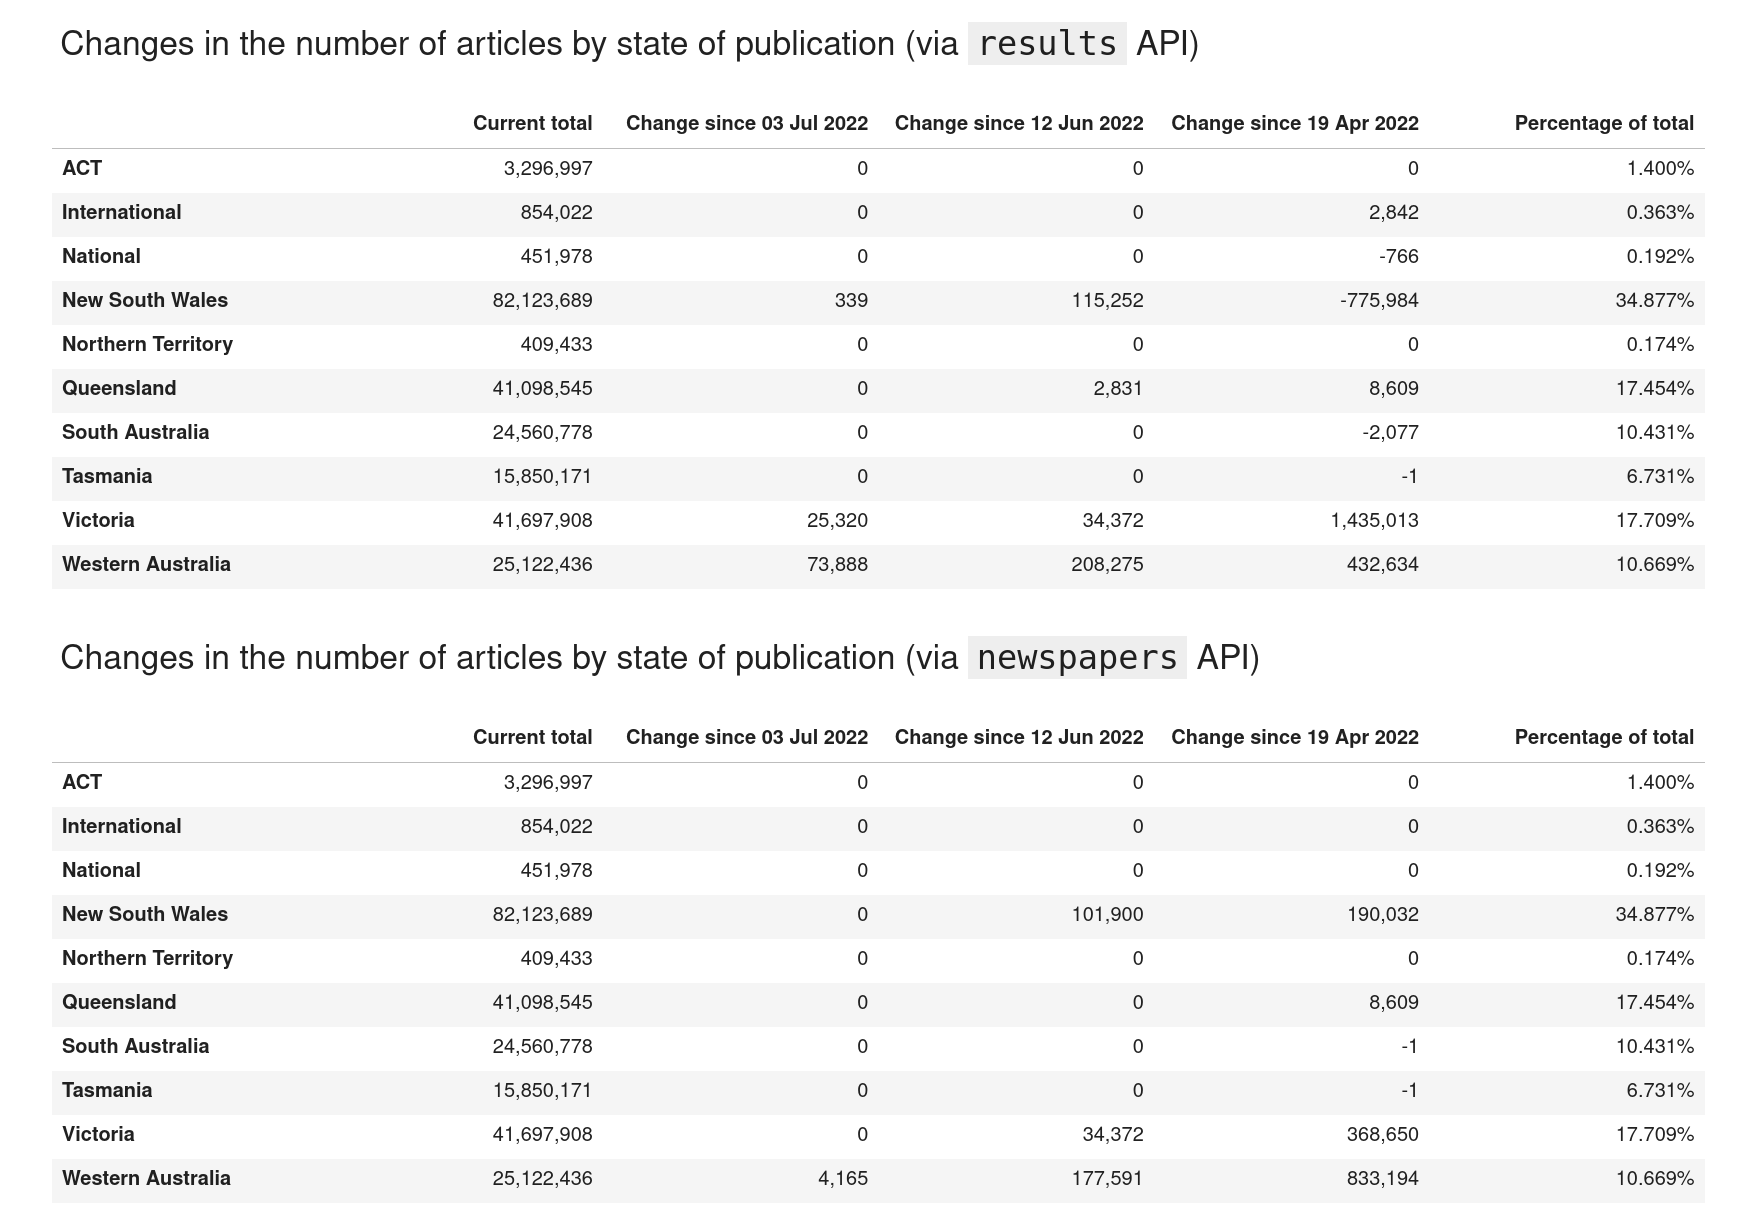 Screenshot of data dashboard that compares the number of articles by state as reported by the results and newspapers APIs. There are major differences in the column that shows the change since April 2022.